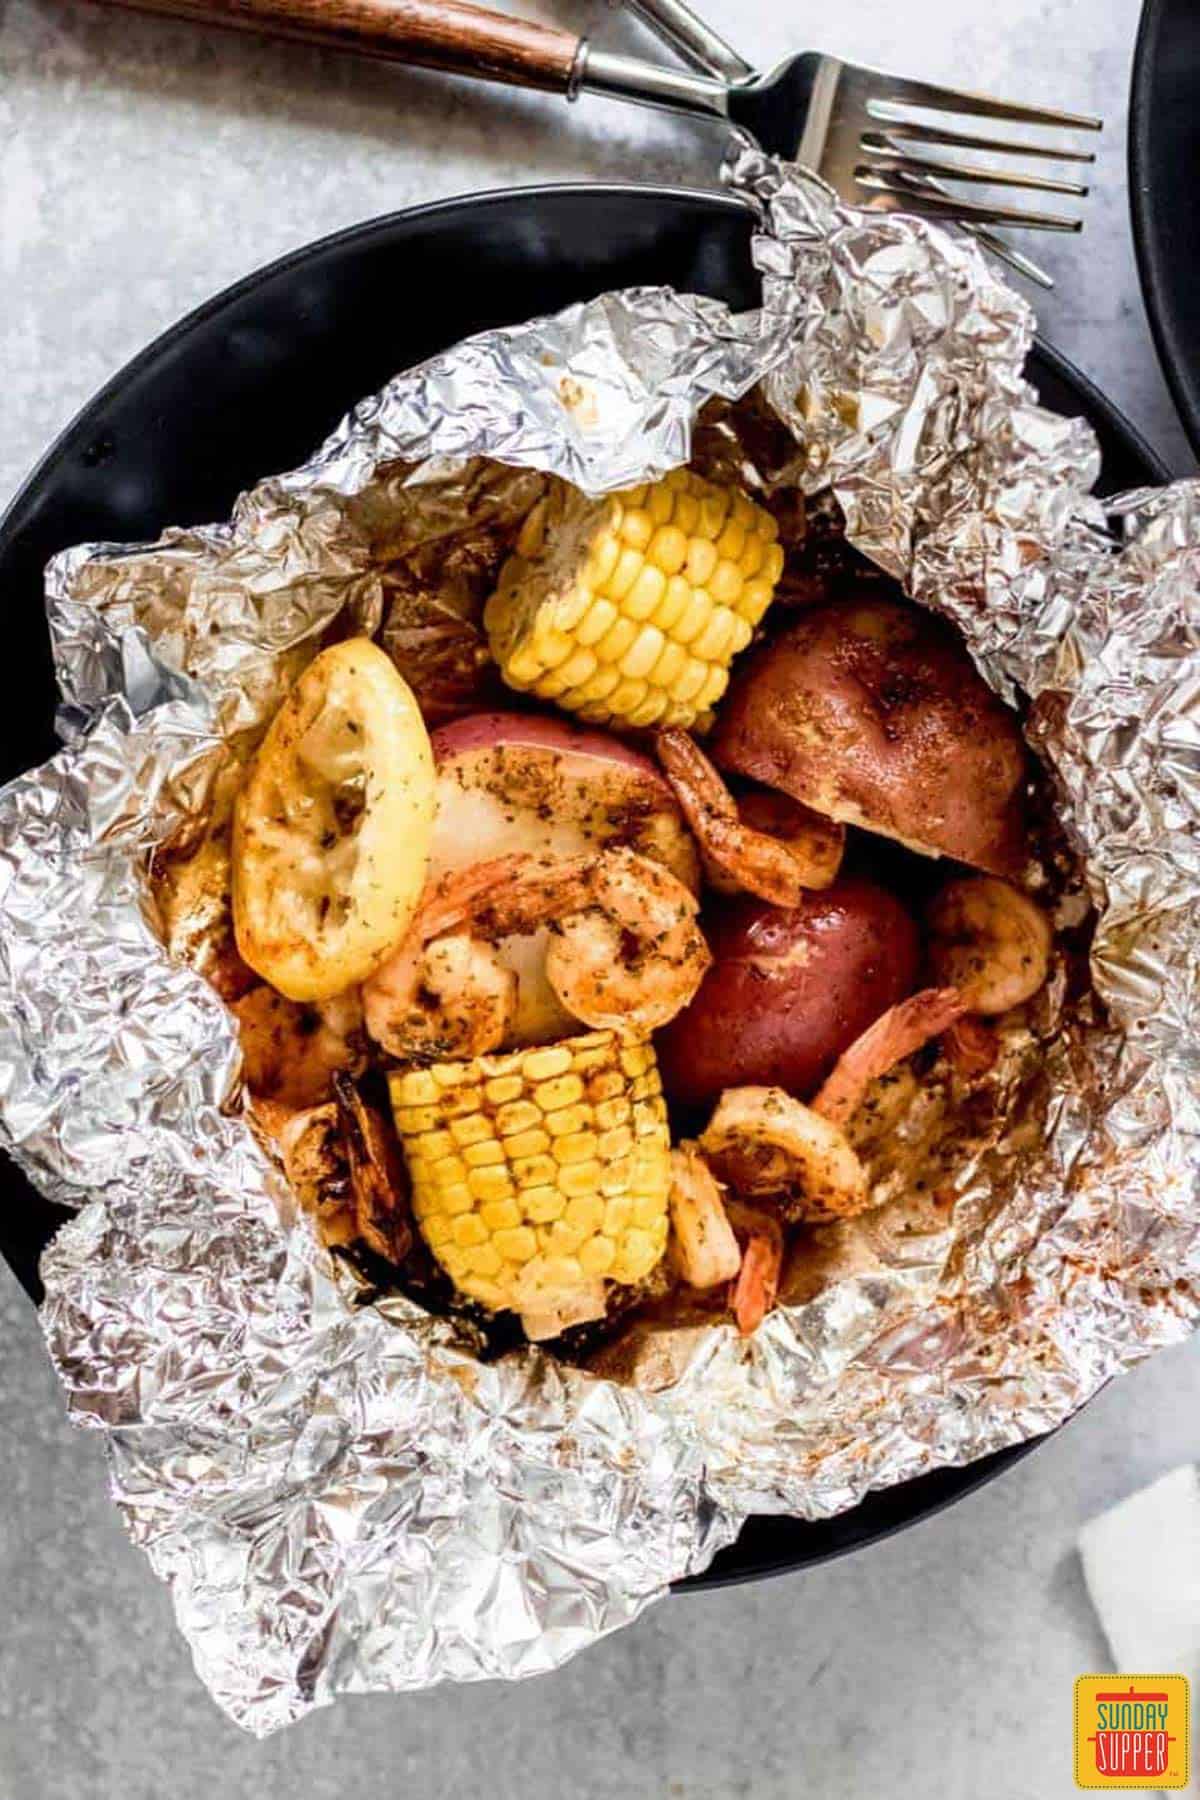 Shrimp, corn, and potatoes in a foil packet after cooking